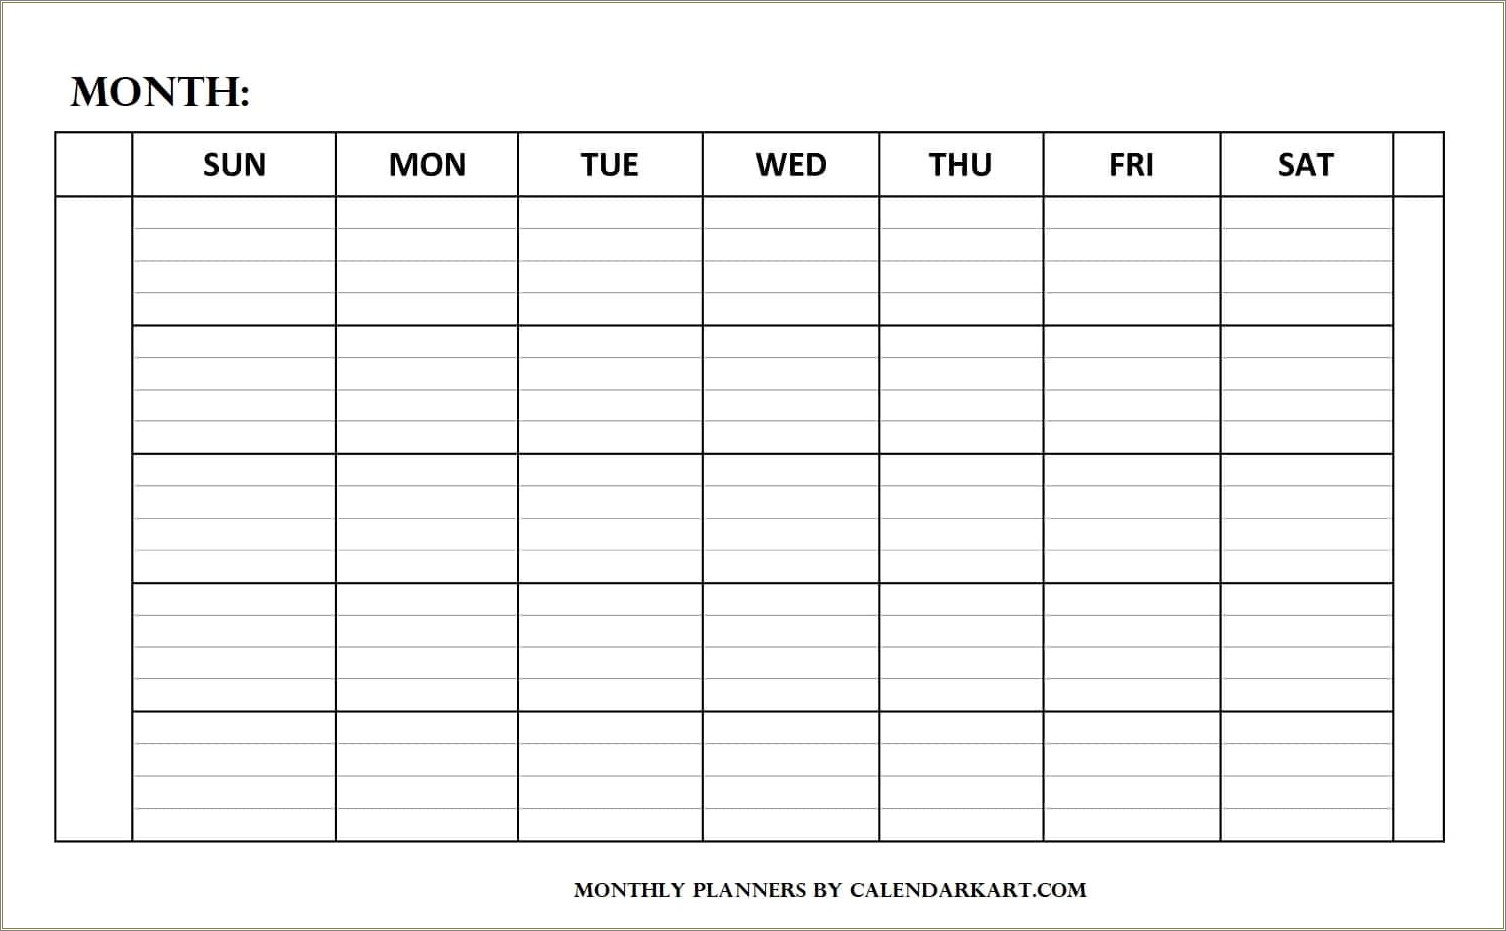 Free Monthly Calendar Planner 2019 Template